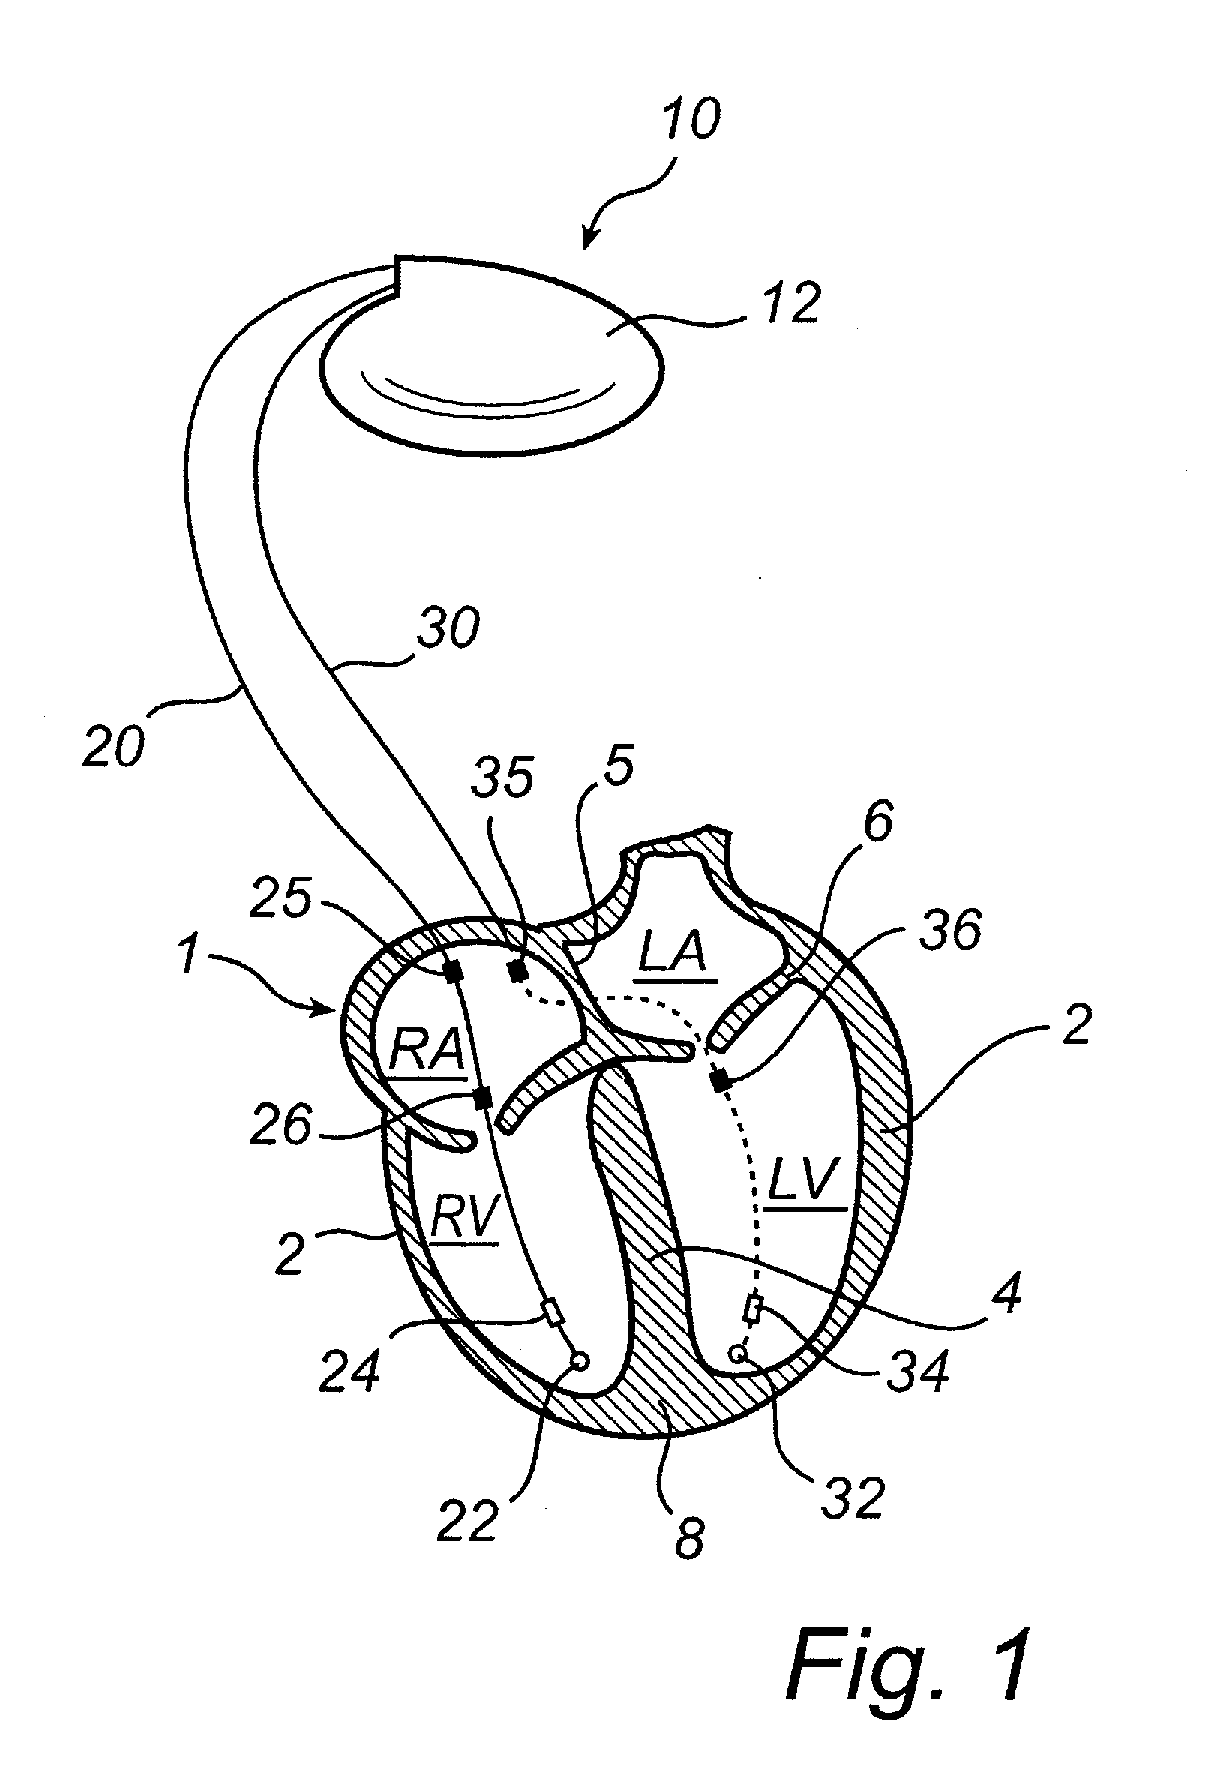 Implantable medical device and method for monitoring valve movements of a heart